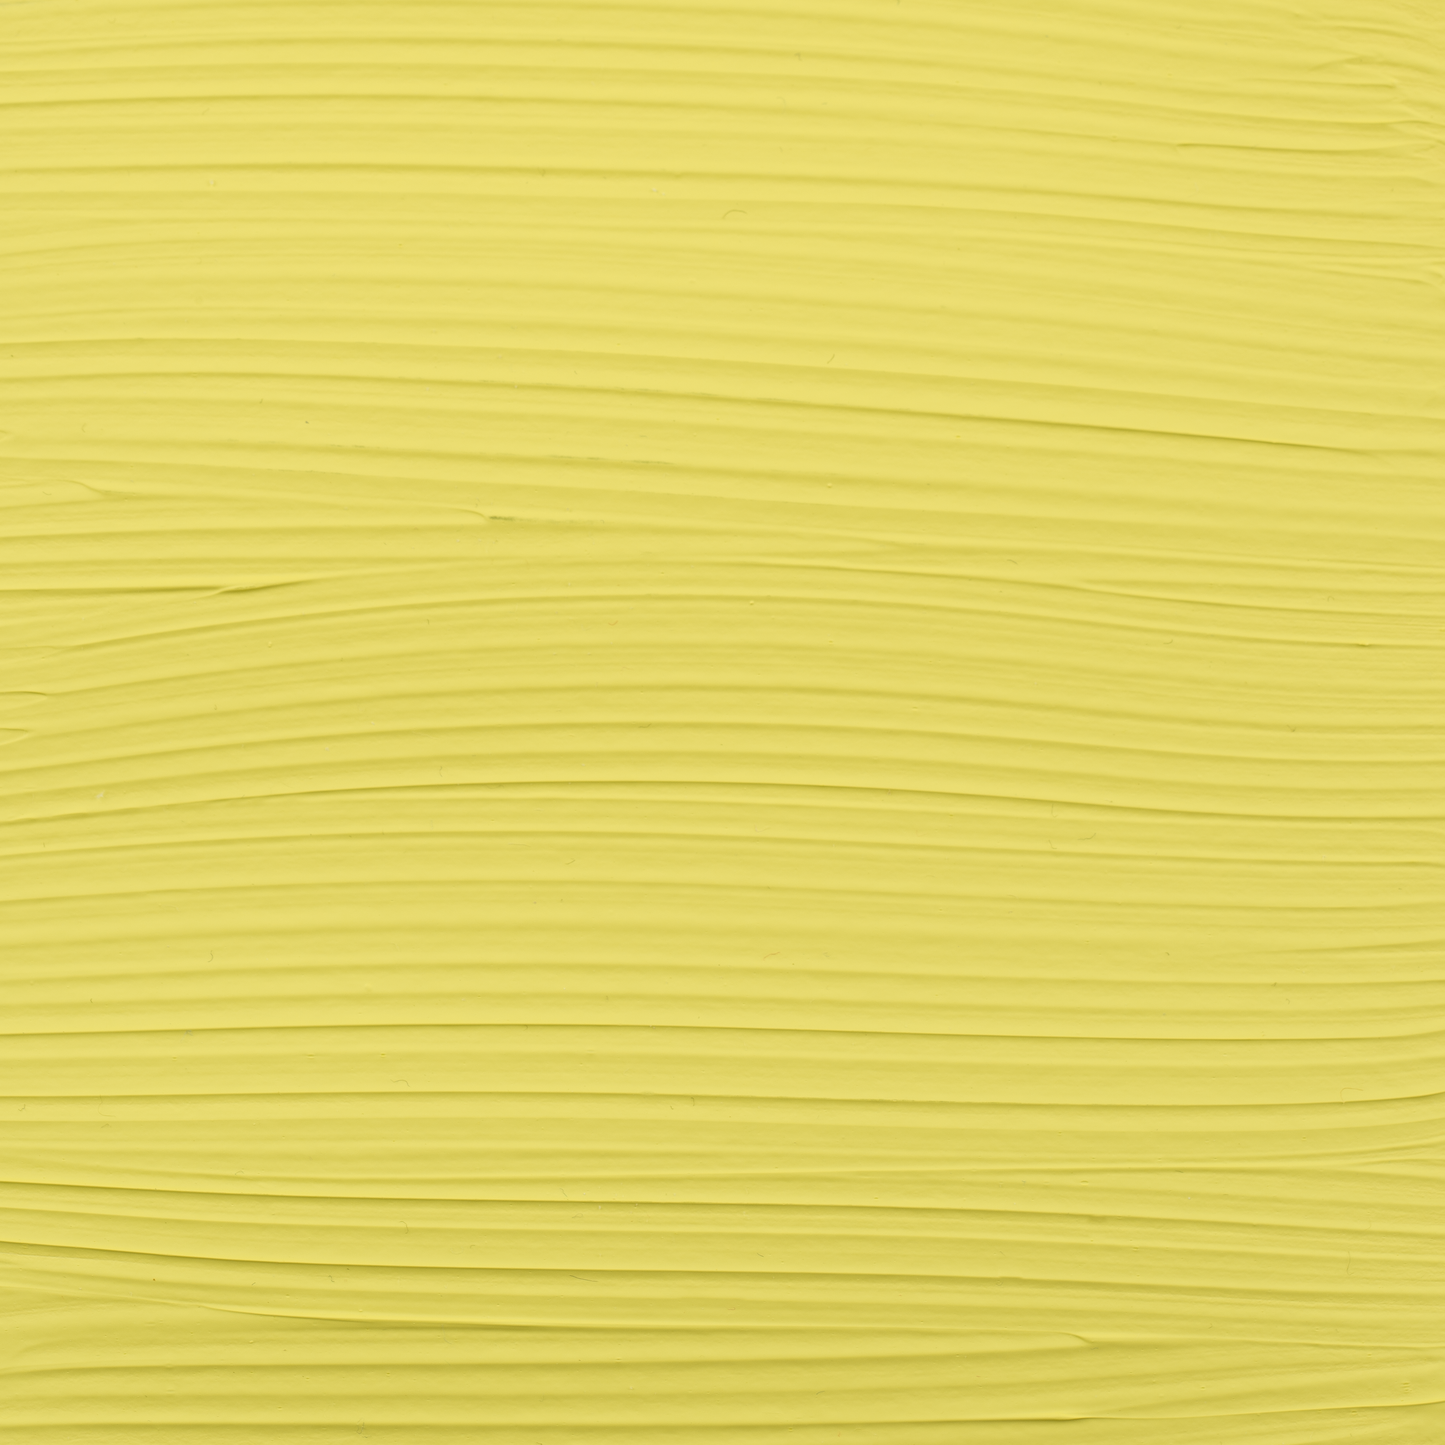 Load image into Gallery viewer, Amsterdam Expert Acrylic Paints : Permanent Lemon Yellow Light 217
